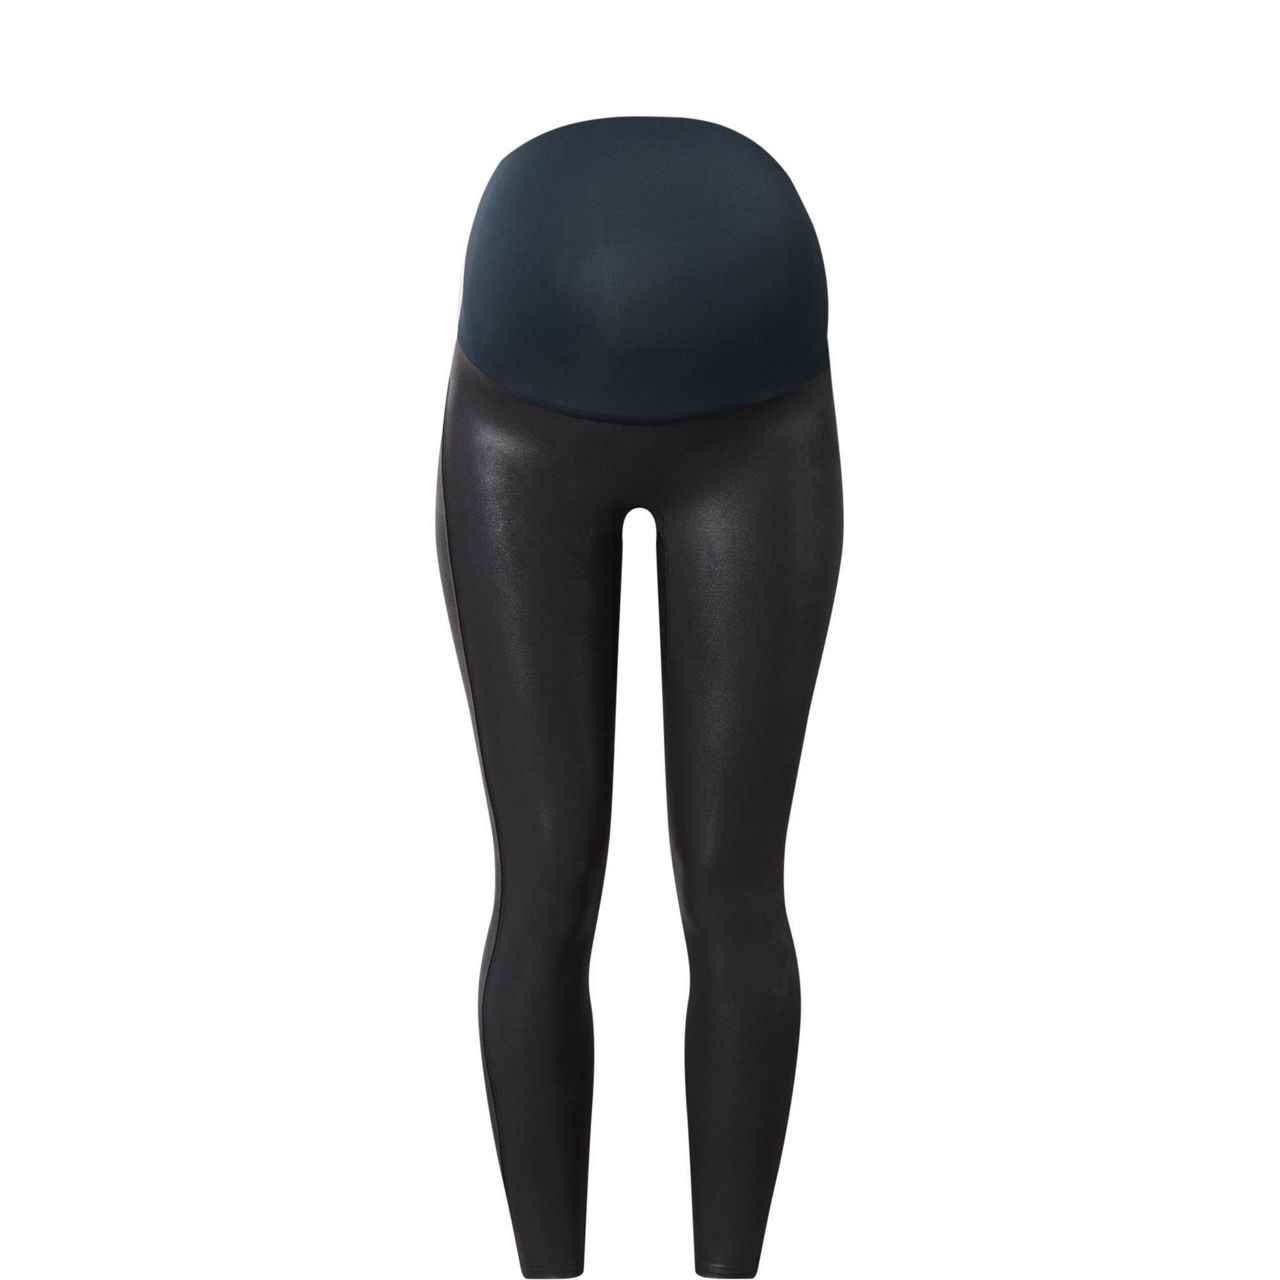 Spanx faux leather high waist sculpting leggings in black